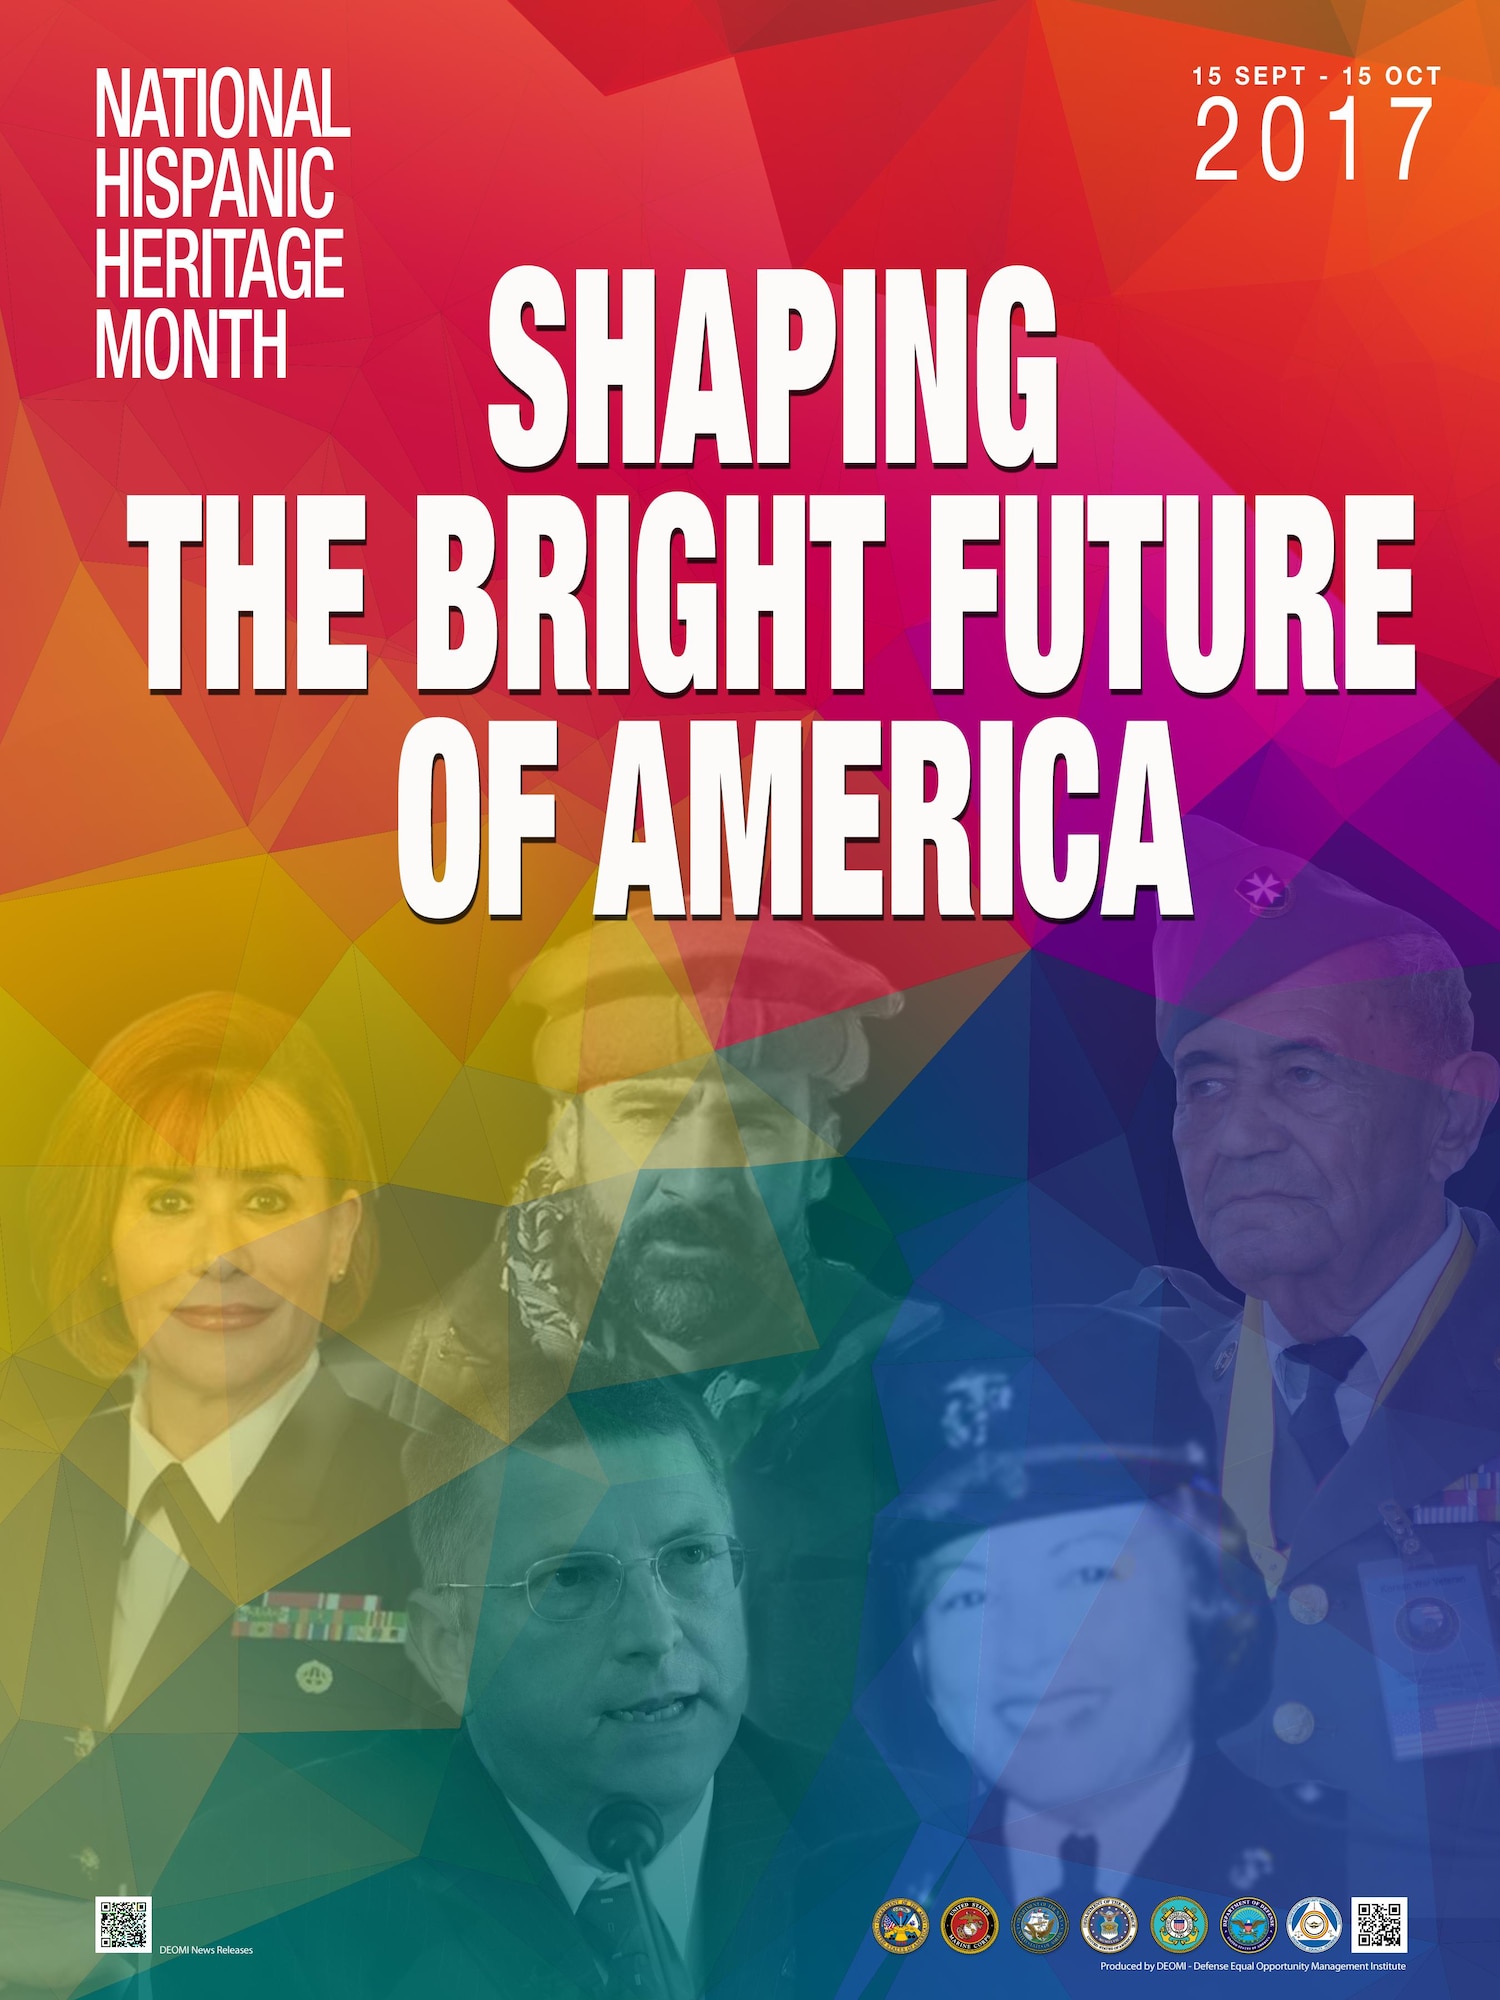 The Department of Defense 2017 National Hispanic Heritage Month graphic.